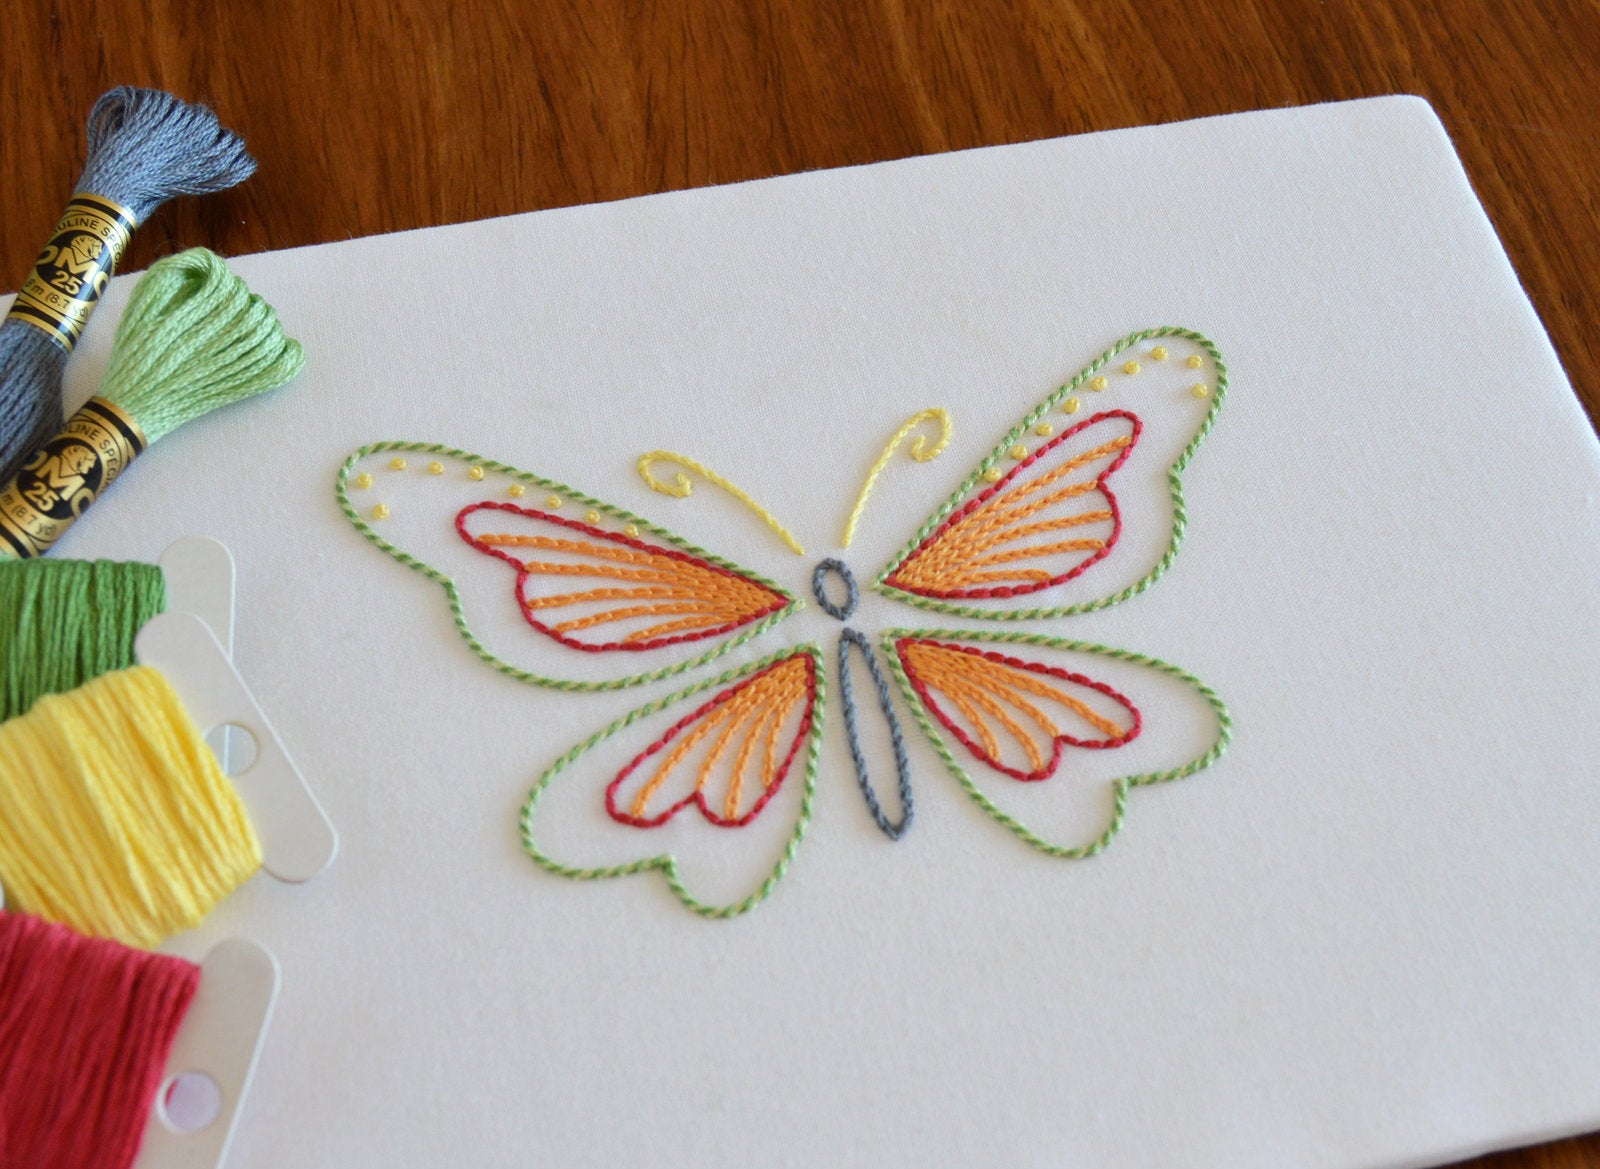 Butterfly Embroidery Pattern Papillon Iv Hand Embroidery Pattern Butterfly Embroidery Modern Embroidery Embroidery Nature Embroidery Patterns Pdf Pattern